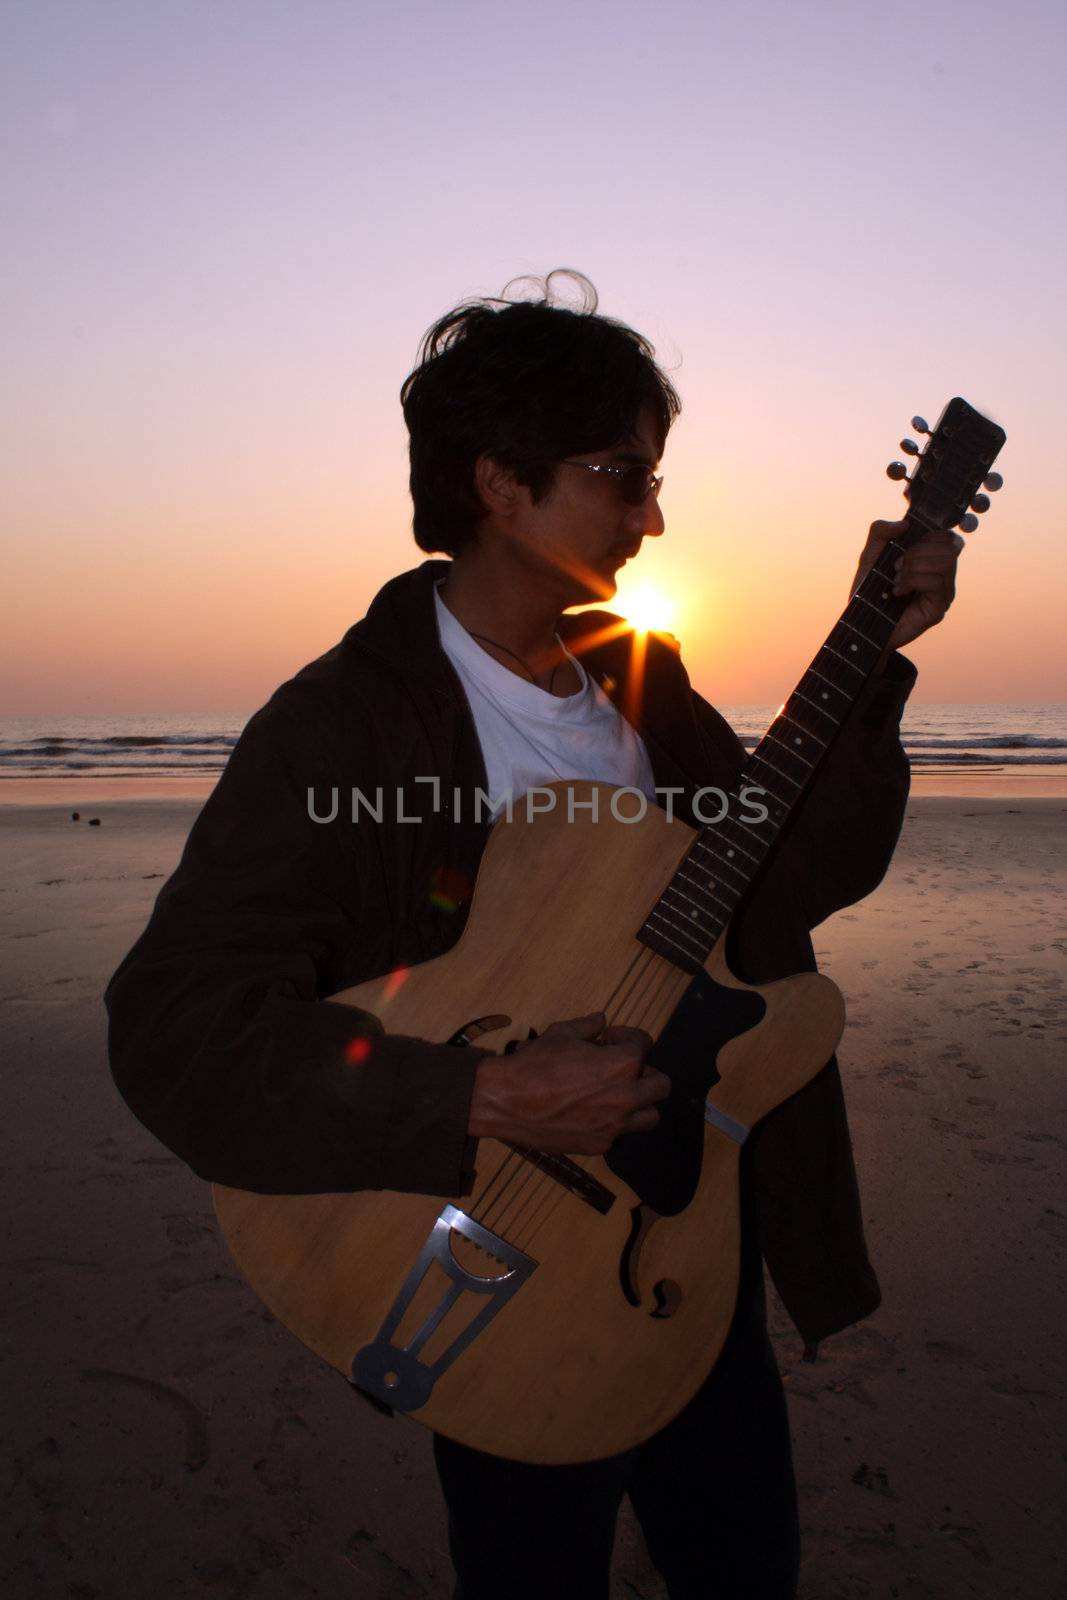 A young Indian guitarist performing on a beach at sunset.